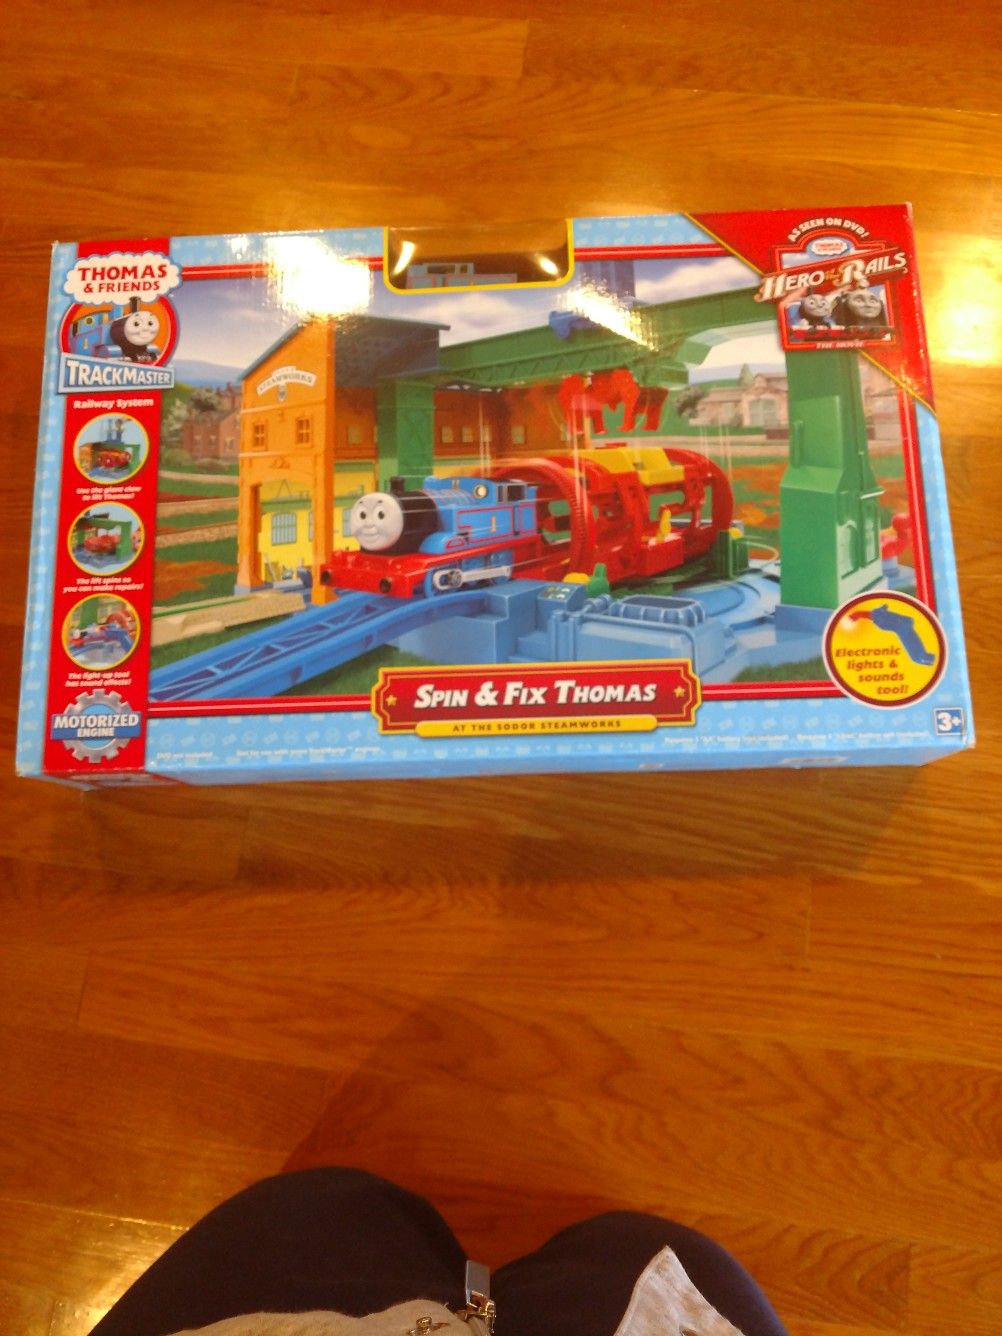 Thomas and Friends Spin and Fix Thomas At The Sodor Steamworks